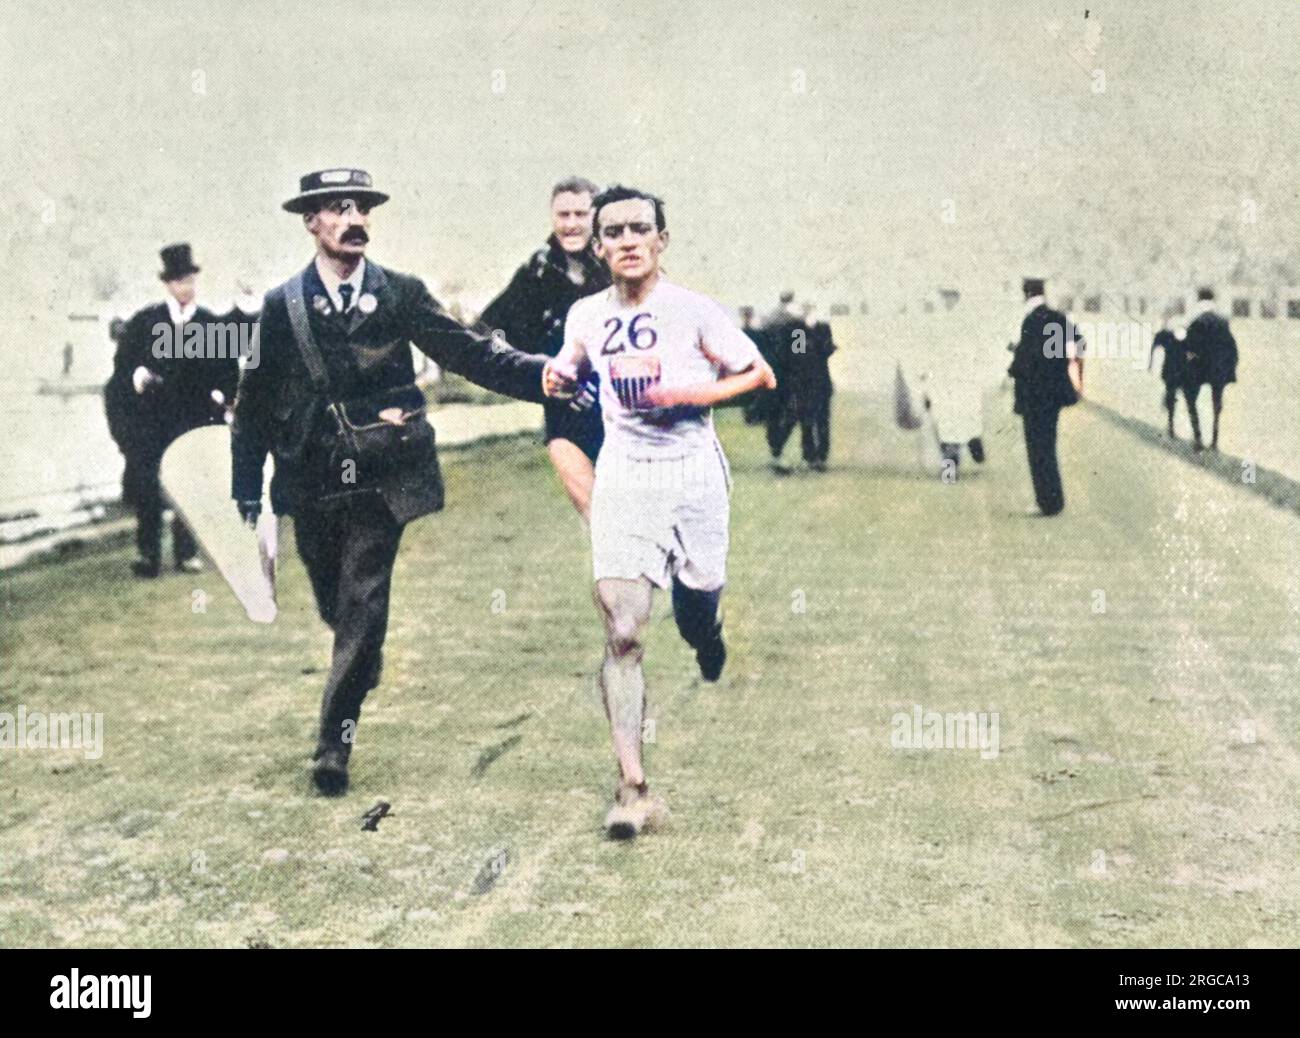 John Hayes, American athlete, in the final leg of the marathon race at the London Olympic Games in 1908. Dorando Pietri of Italy collapsed after entering the stadium ahead of the pack. He was revived by doctors and some of the officials helped him to his feet and then assisted him to the finish line. John Hayes of the United States was the second finisher. Pietri had been declared the winner, but the Americans lodged a protest that was finally upheld. Dorando was nevertheless presented with a special cup by Queen Alexandra for his 'pluck'. Stock Photo